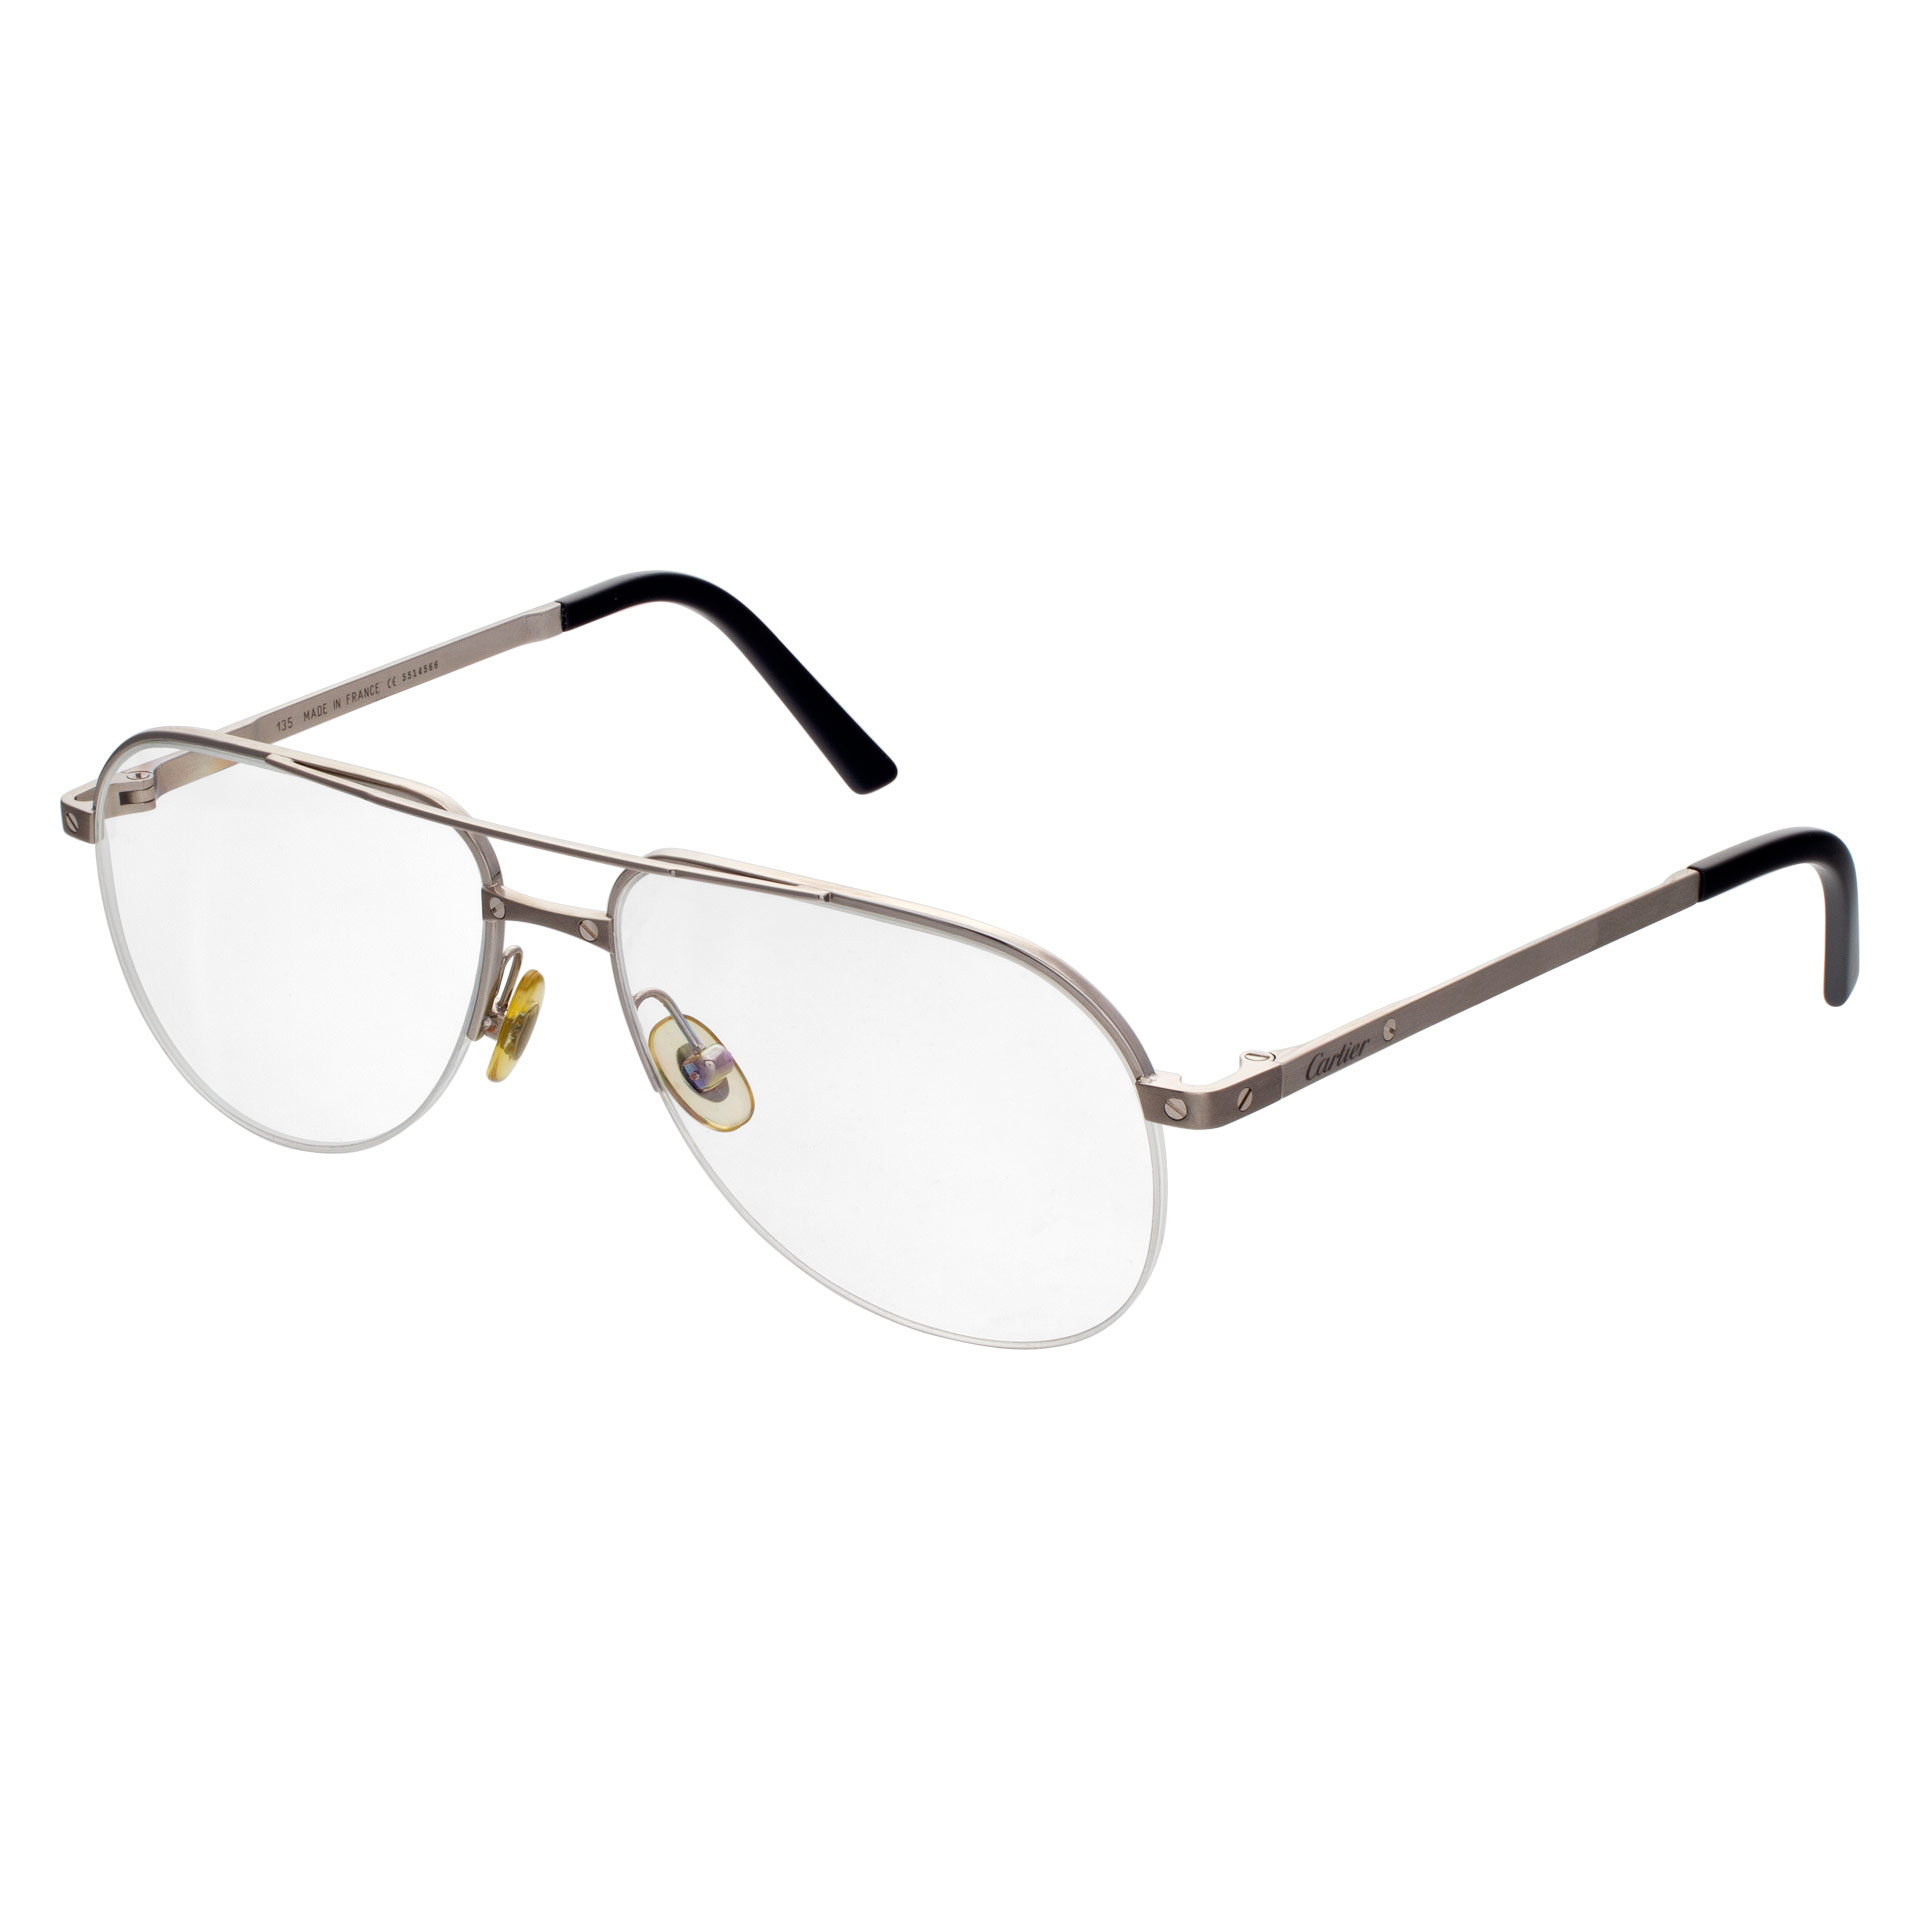 Cartier glasses stainless steel frame image 4